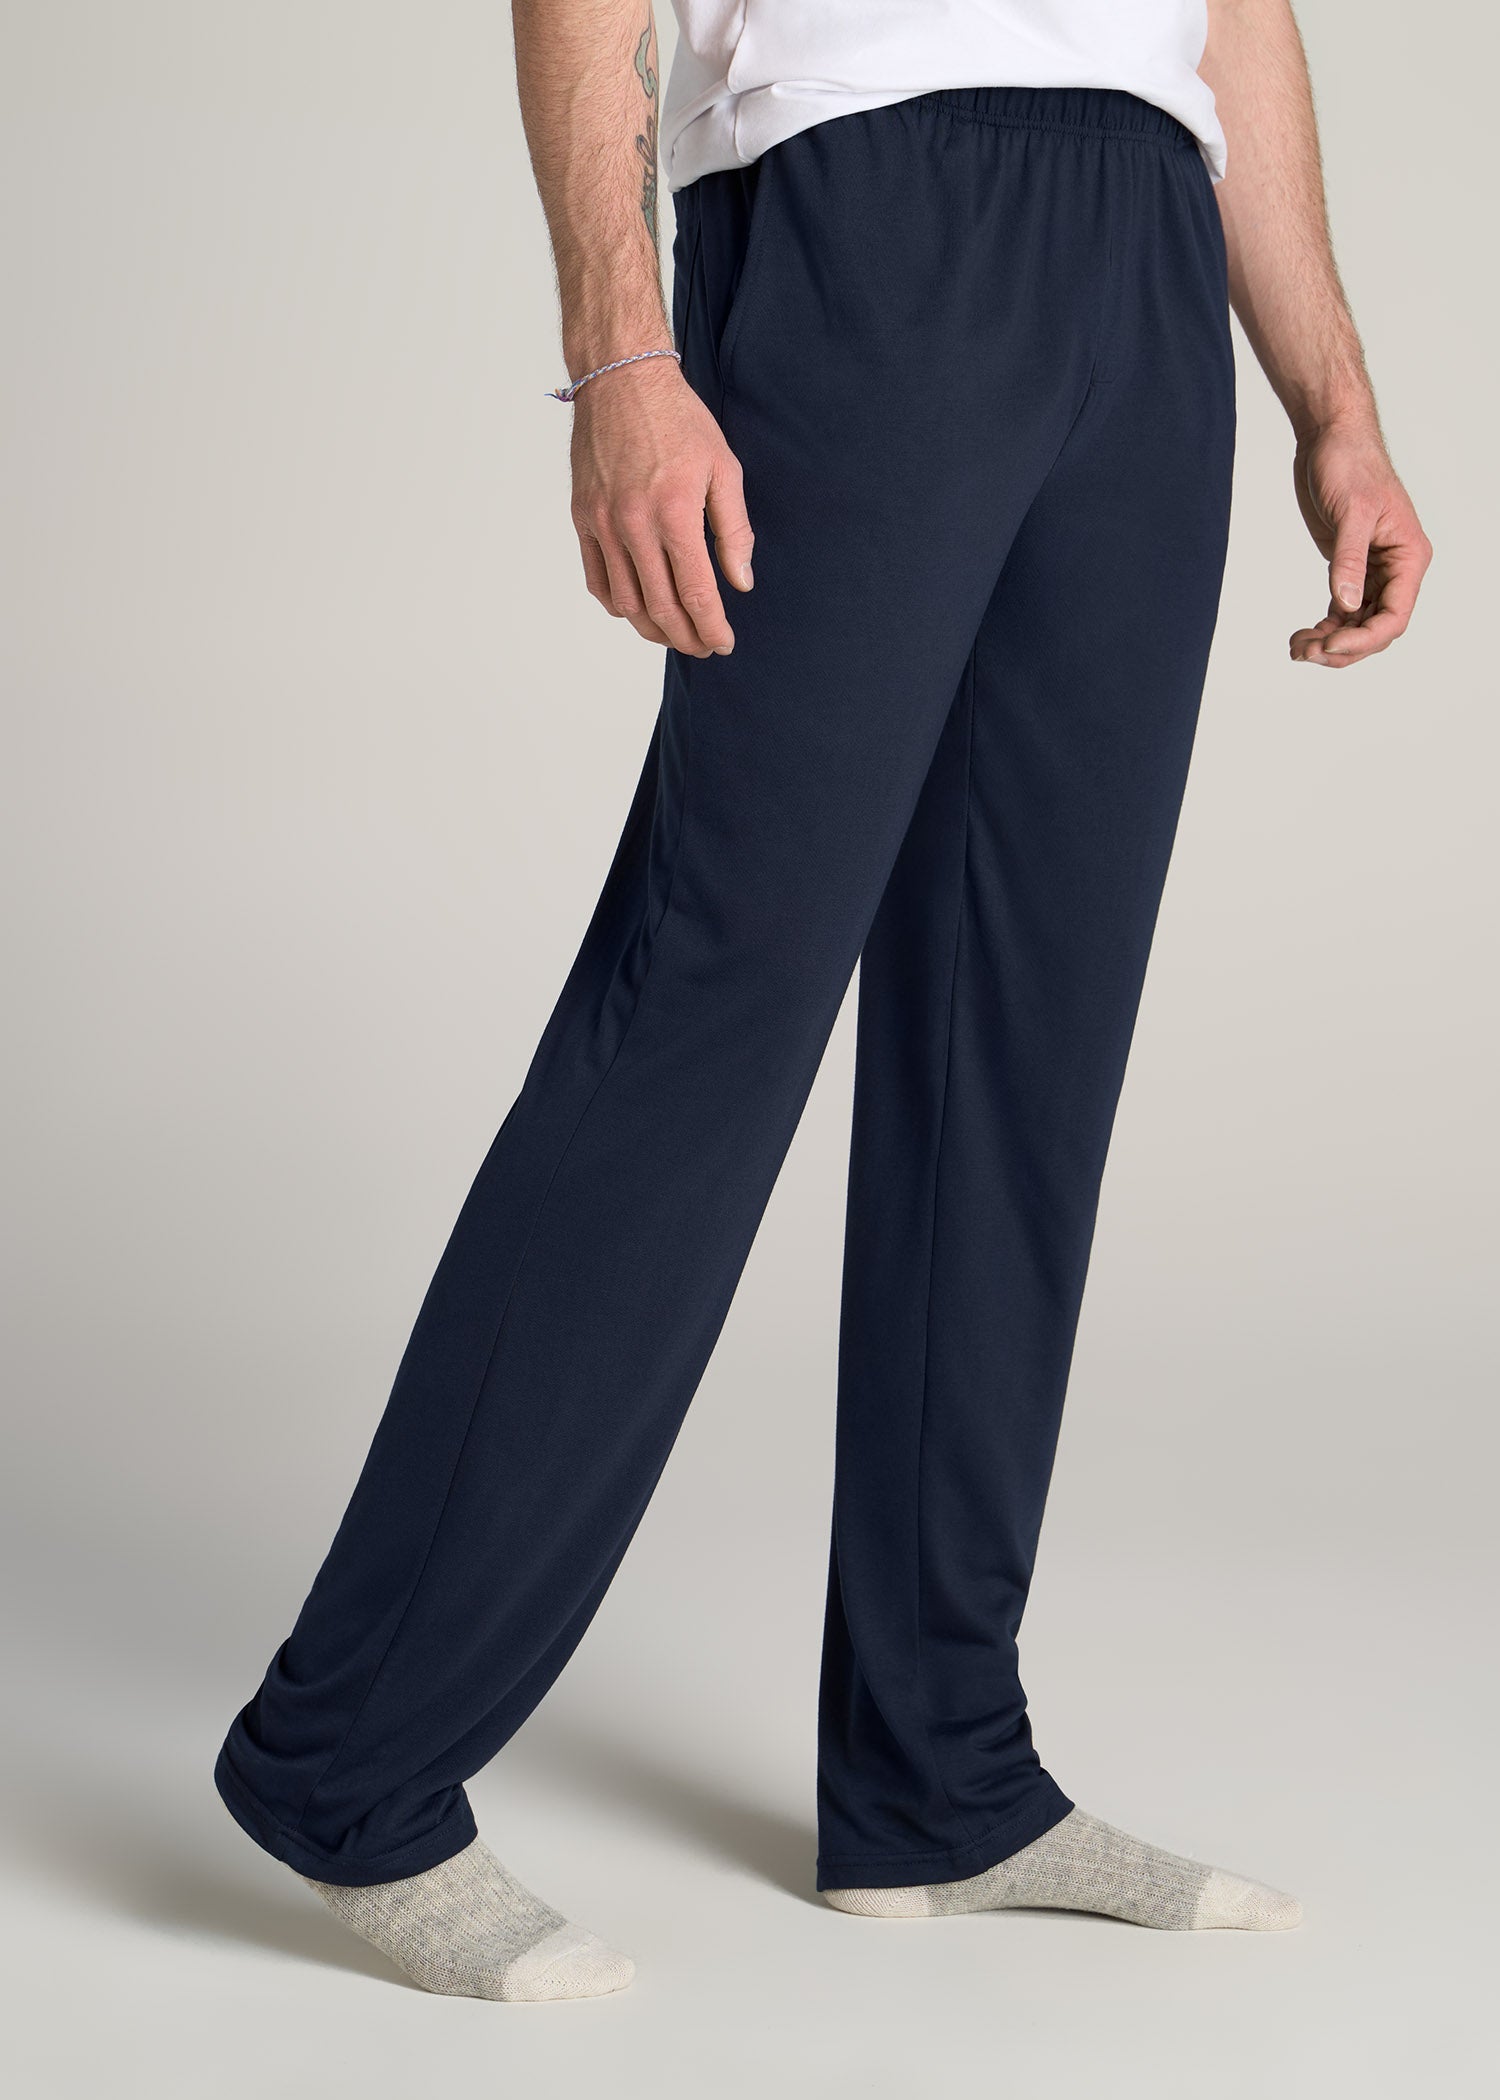 Wholesale Clothing Manufacturer 100%Polyester Home Wear Extra Long Sports  Pants,Mesh Athletic Pants,Run Pants Men Trousers Relax From m.alibaba.com